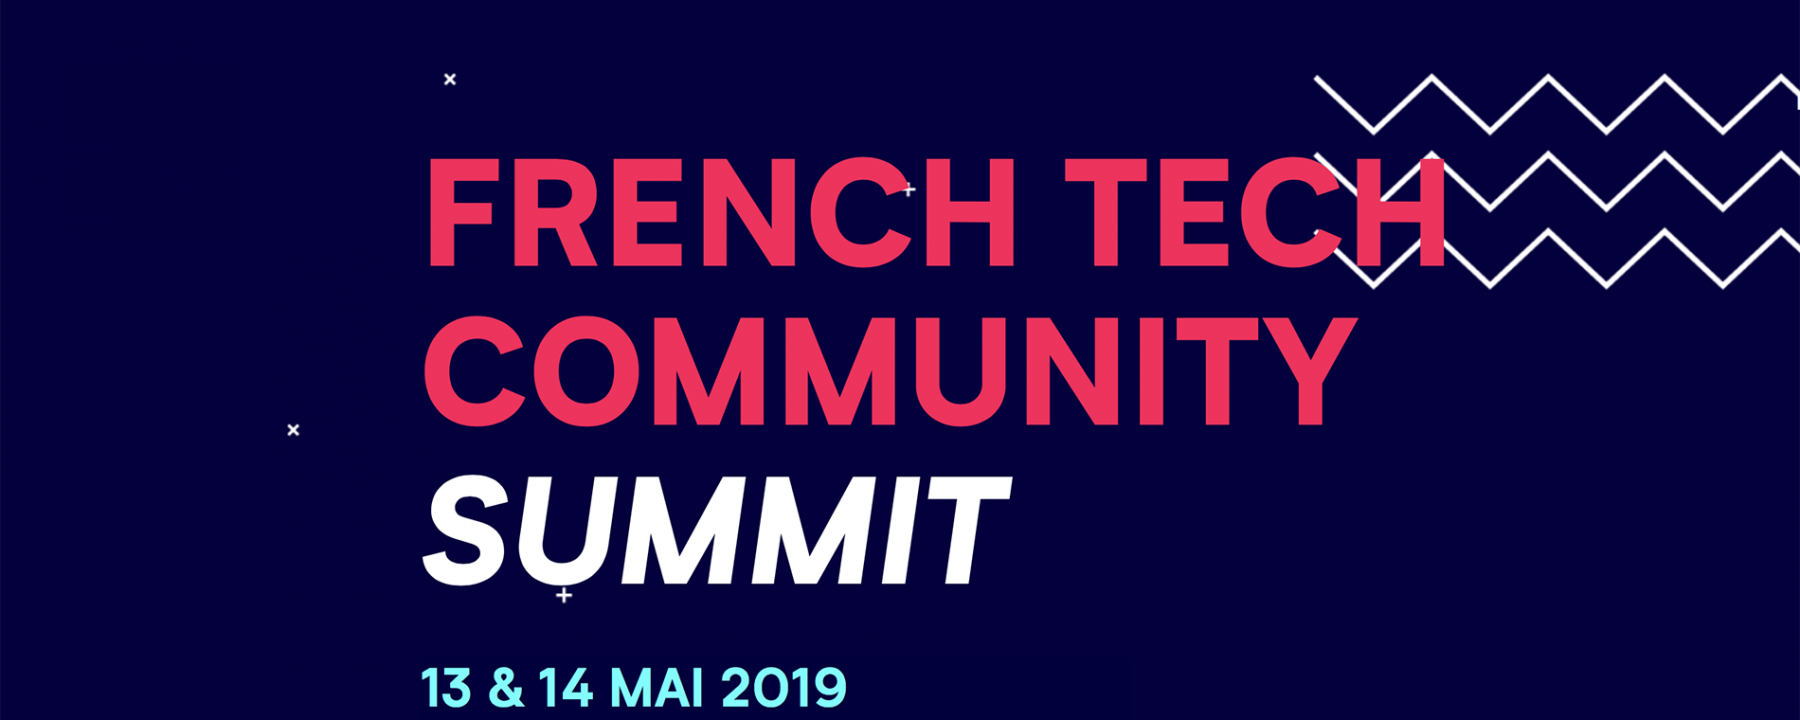 1e édition French Tech Community Summit 